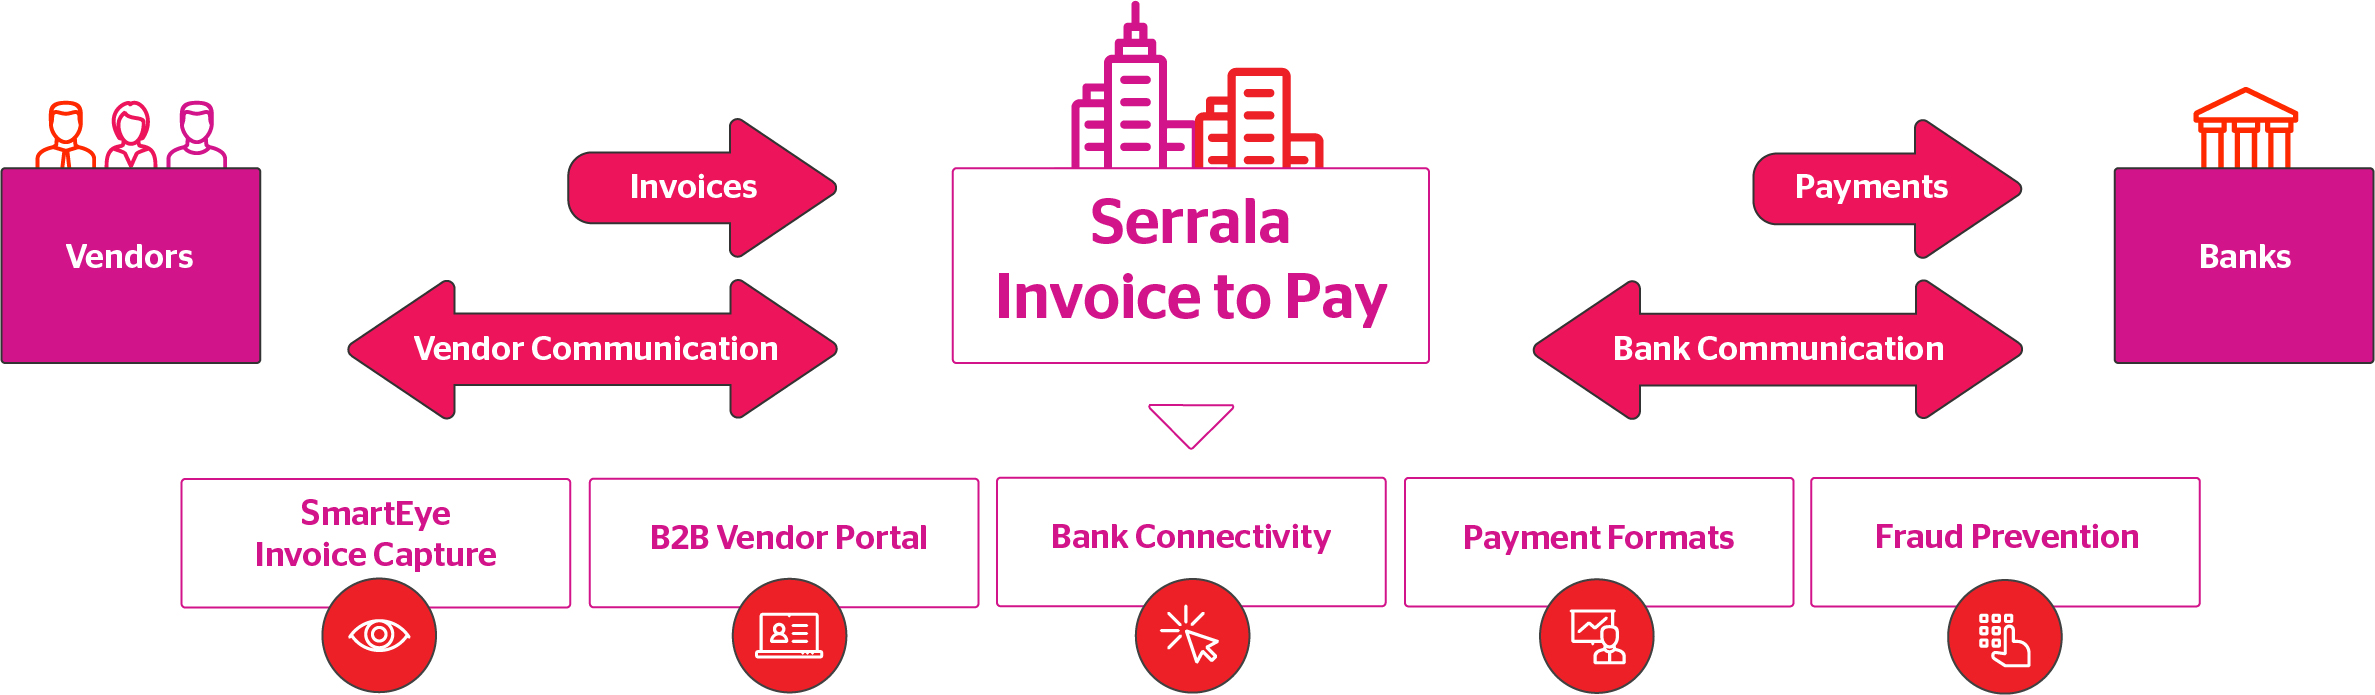 The chart provides an overview of Serrala Invoice to Pay solutions that can help improve your accounts payable and payment activities